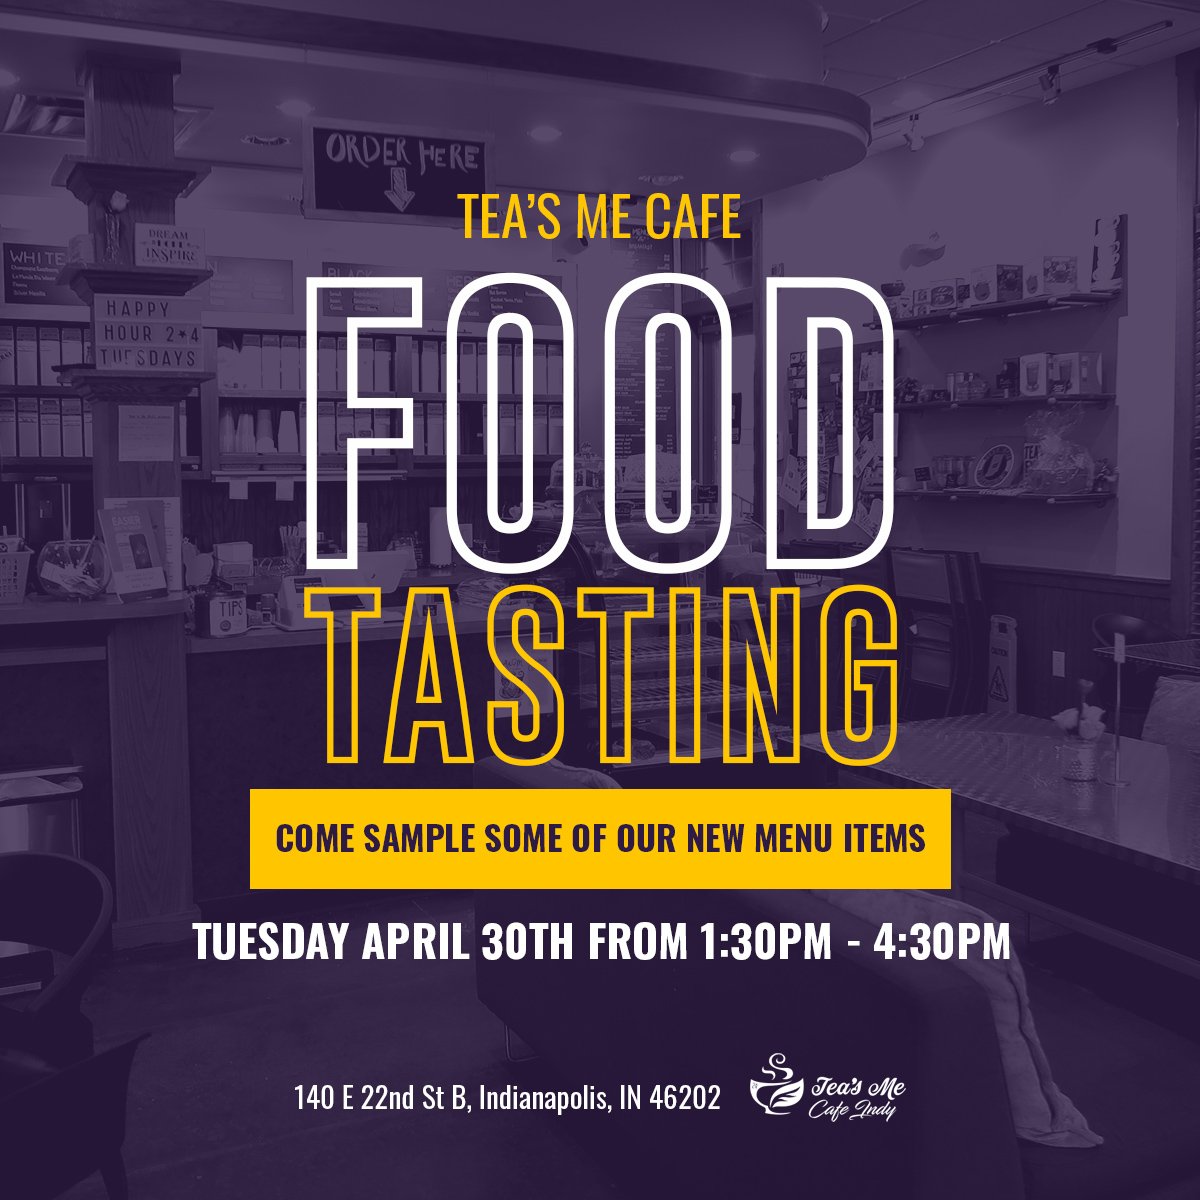 FOODIES! Our menu is changing!! Stop in April 30th between 1:30pm-4:30pm for our Food Tasting Tuesday!
We'd love to hear your feedback on each and every option.
 #vegetarian #vegan #foodie #food #indyfoodie #eatindy #indyeats  #foodieindy #foodblogger #foodlover  #foodforfoodie